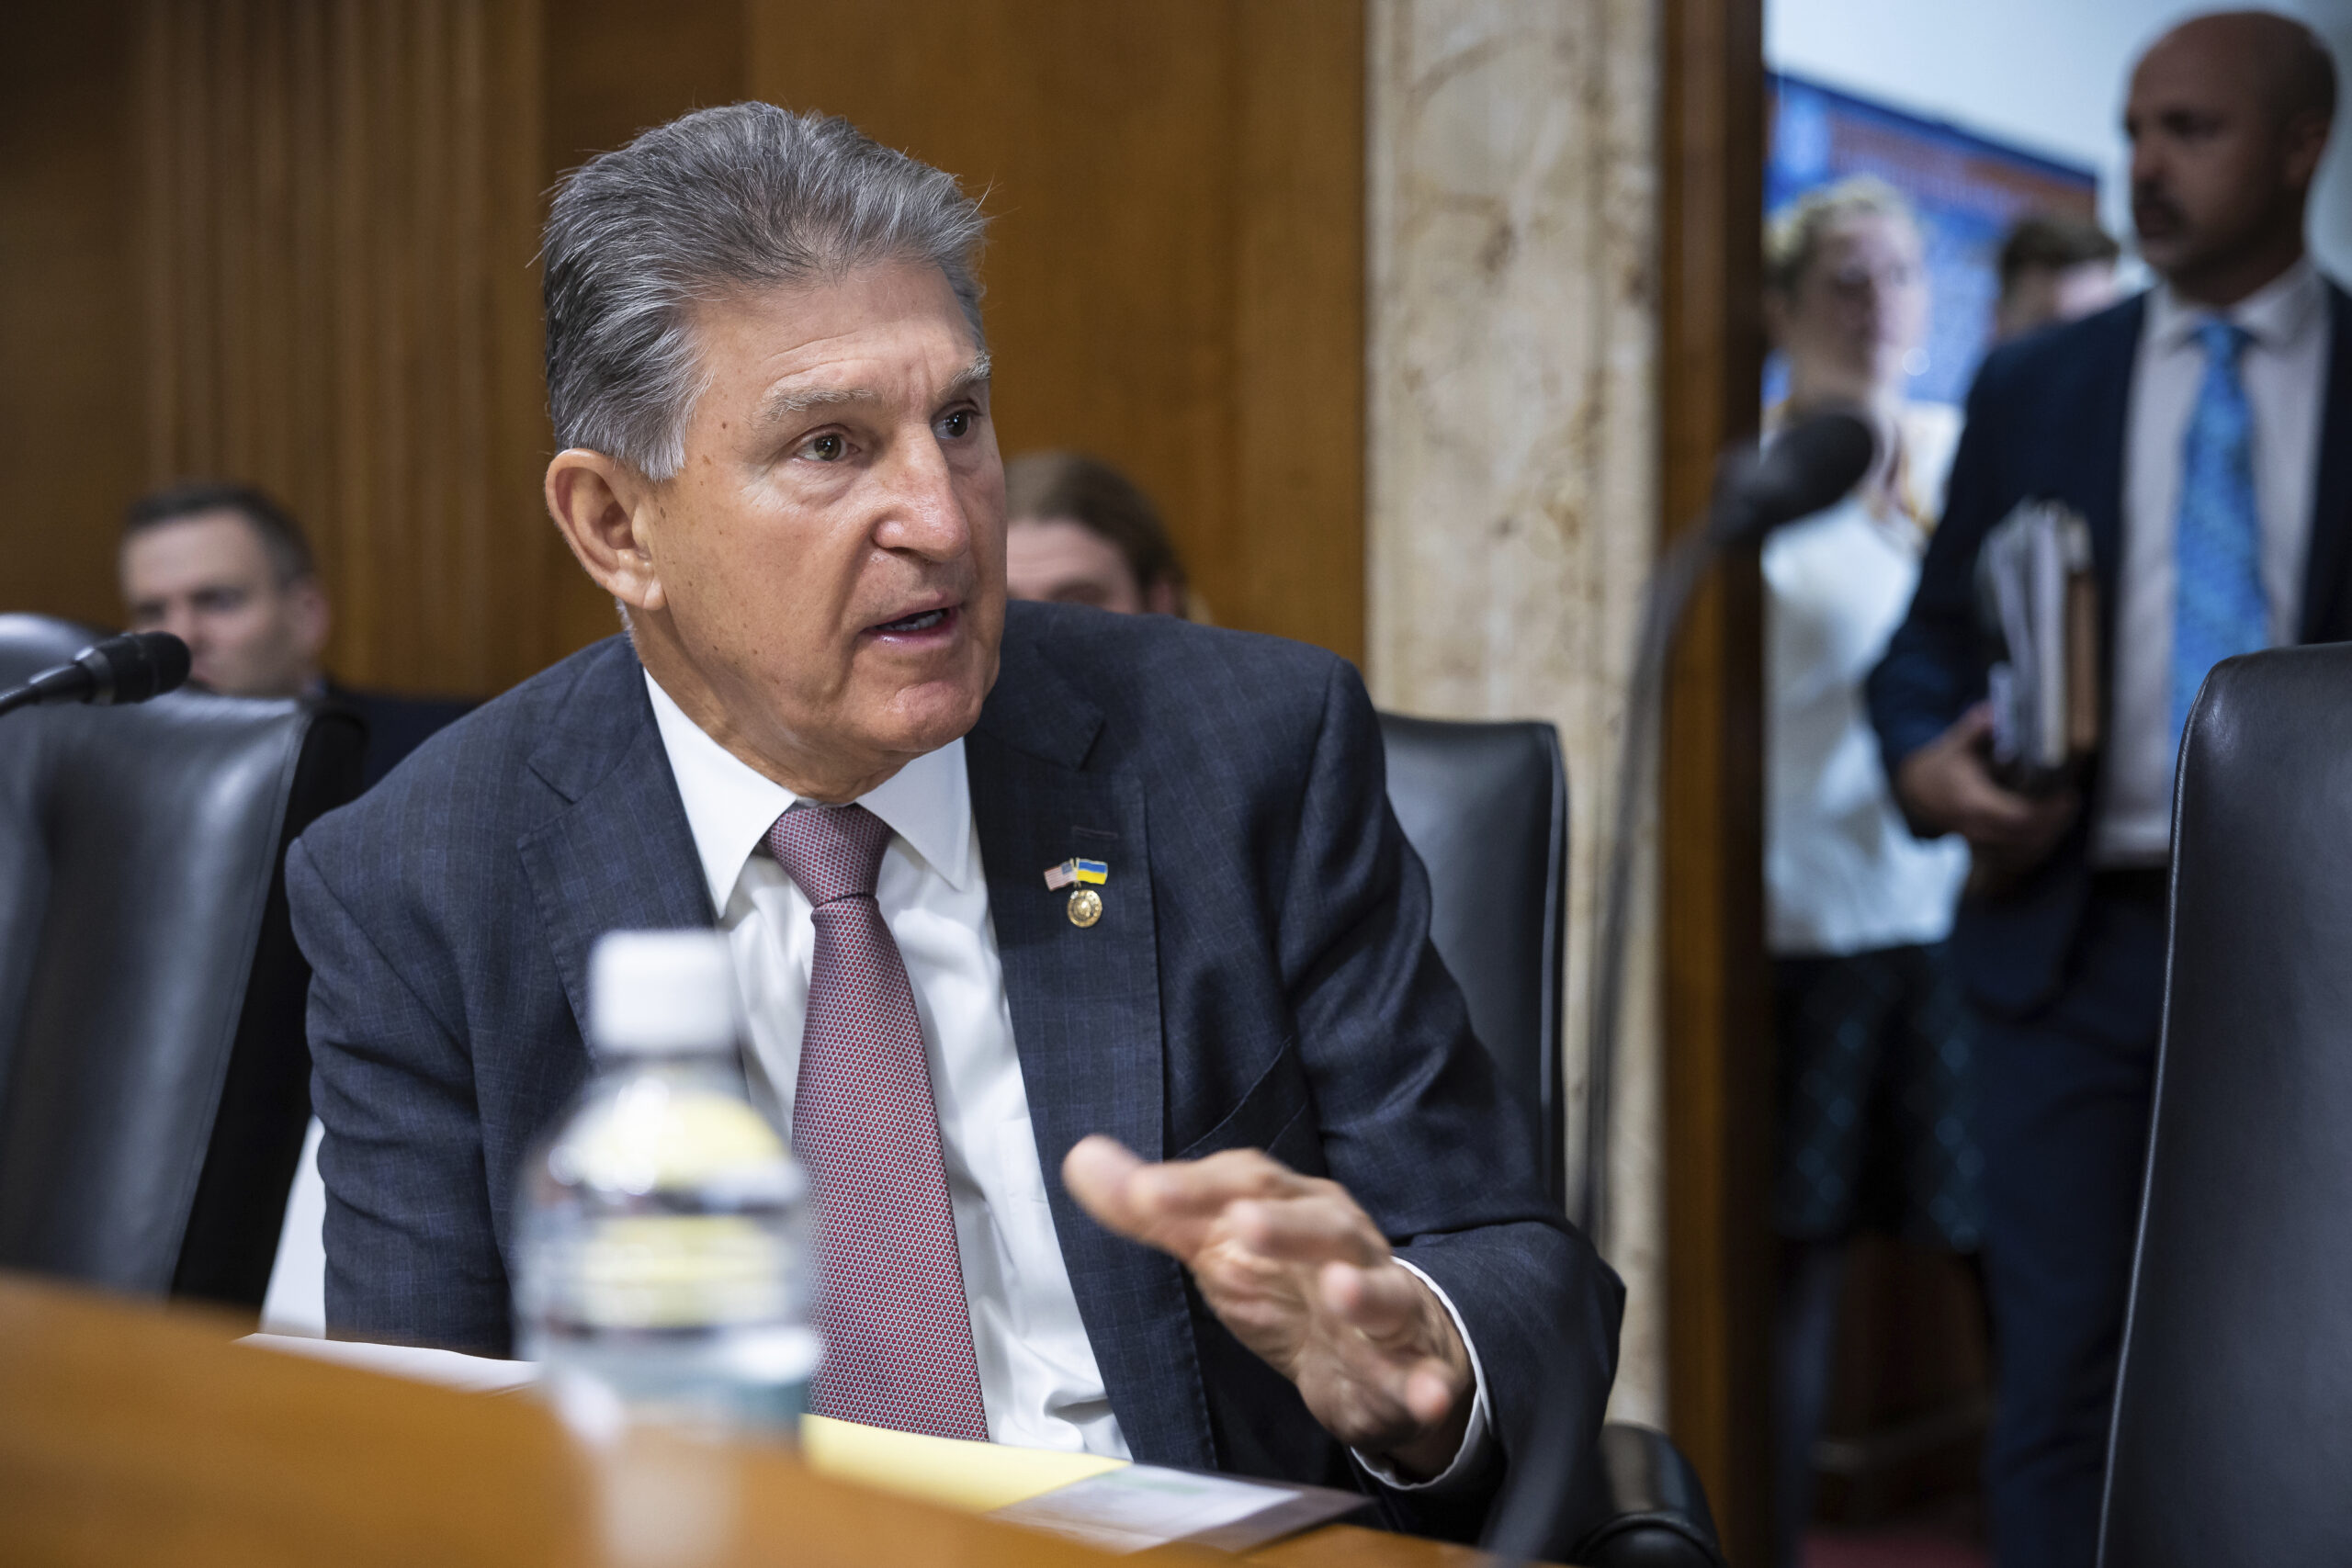 Manchin vows to oppose all Biden’s EPA nominees over climate plan